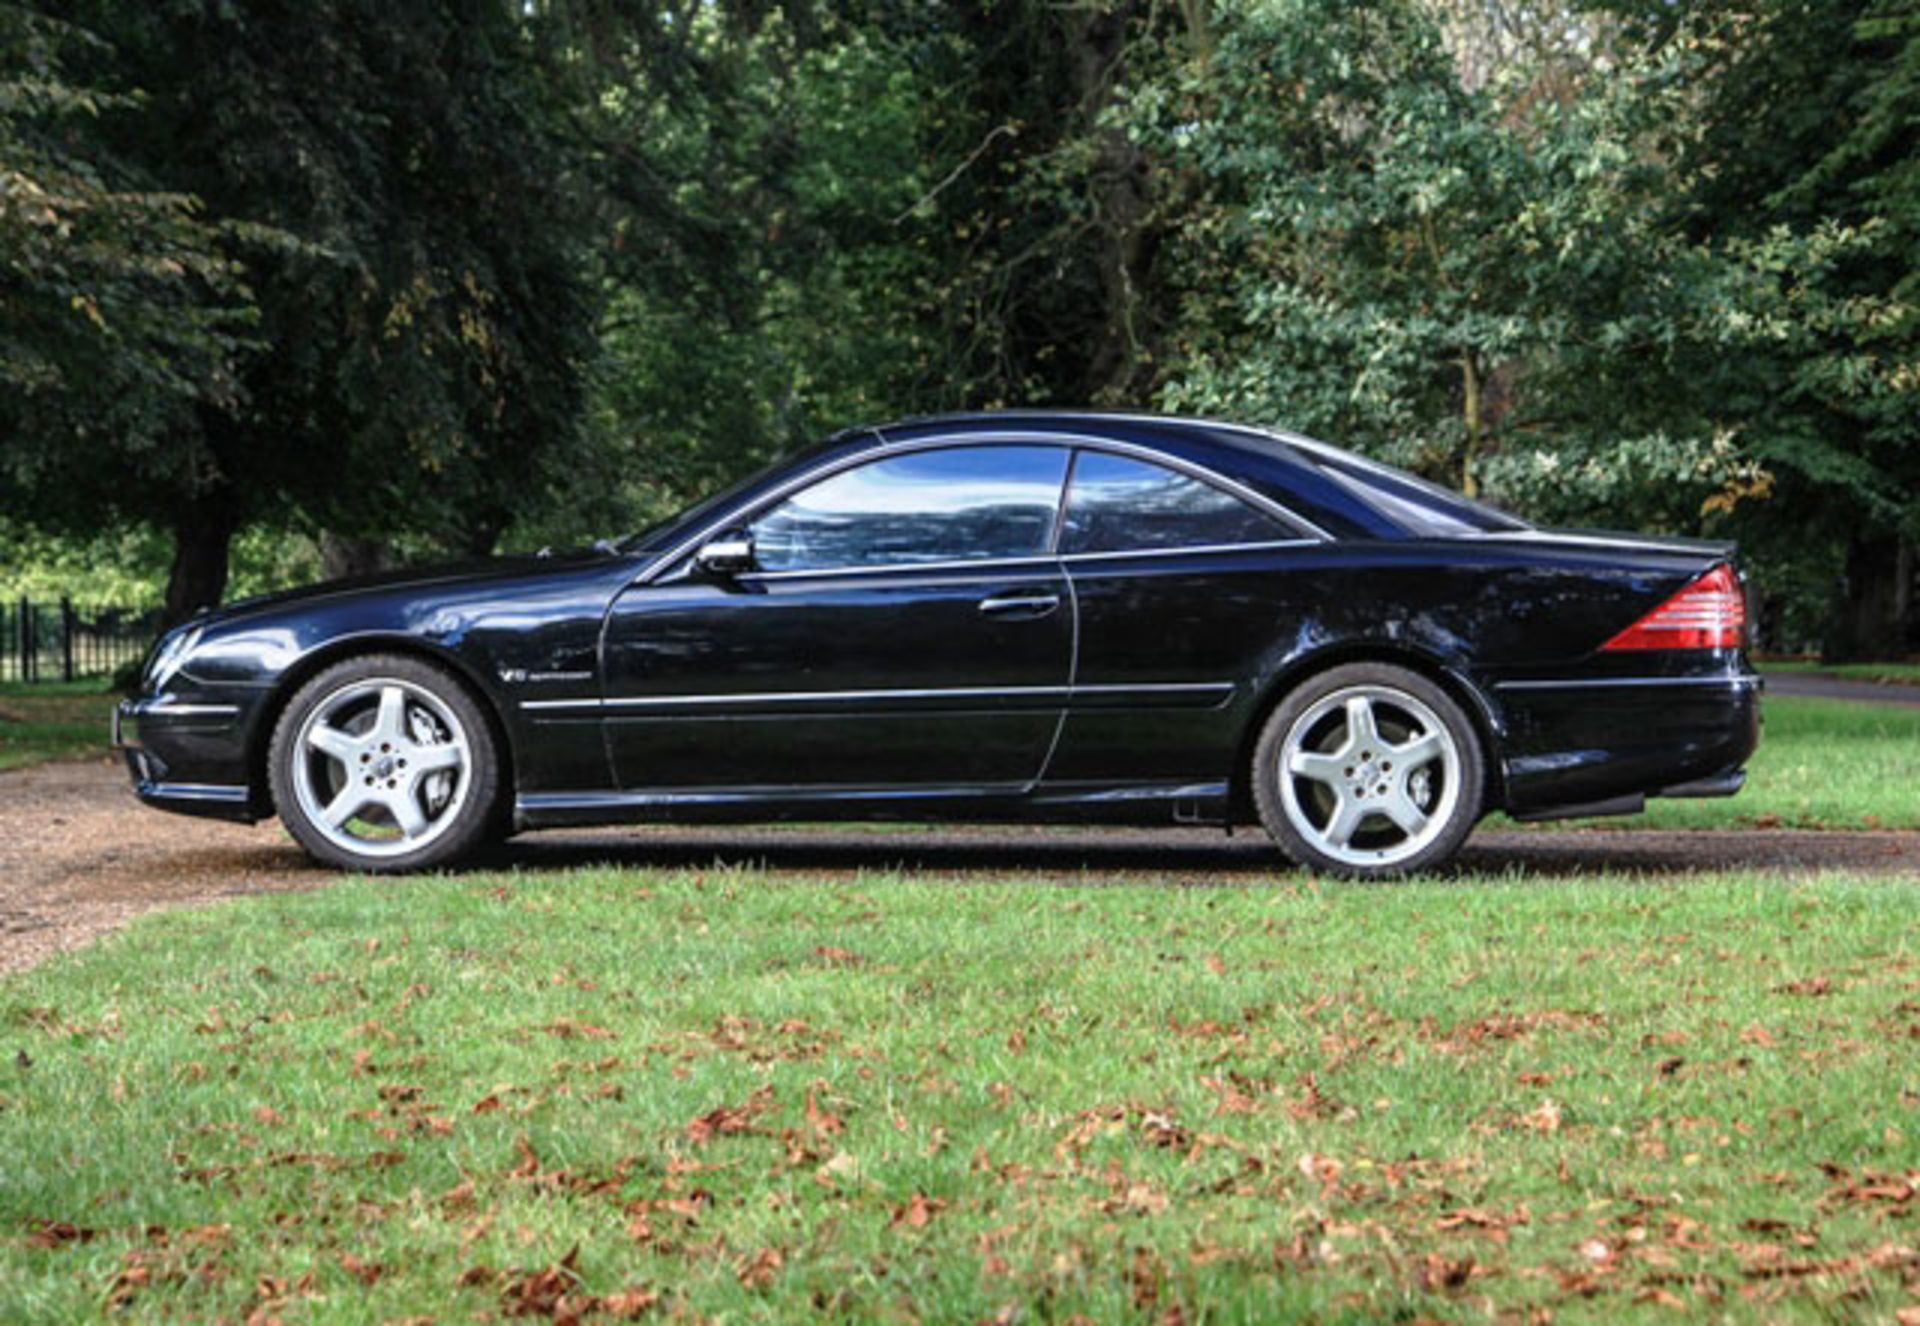 2003 Mercedes-Benz CL 55 AMG - Image 2 of 5